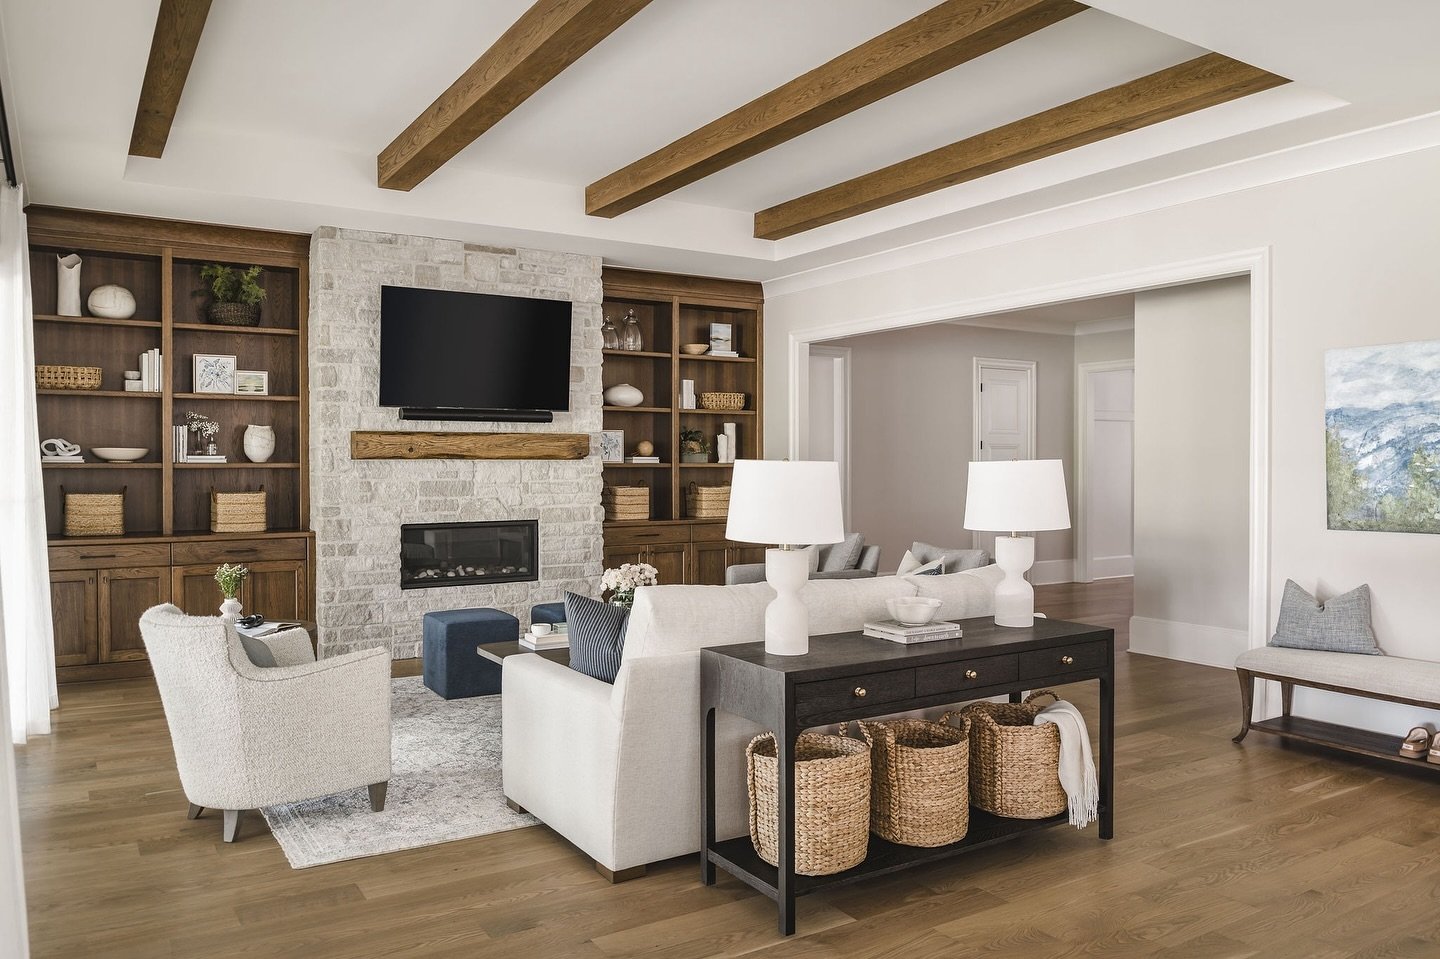 MAY we say that the #LifeOnLongview living room is always a beauty! 🤍

We are thrilled to share that this space has recently been featured in this month&rsquo;s @southparkmagazine. As a bonus, this living room is also the most shared on @houzz so fa